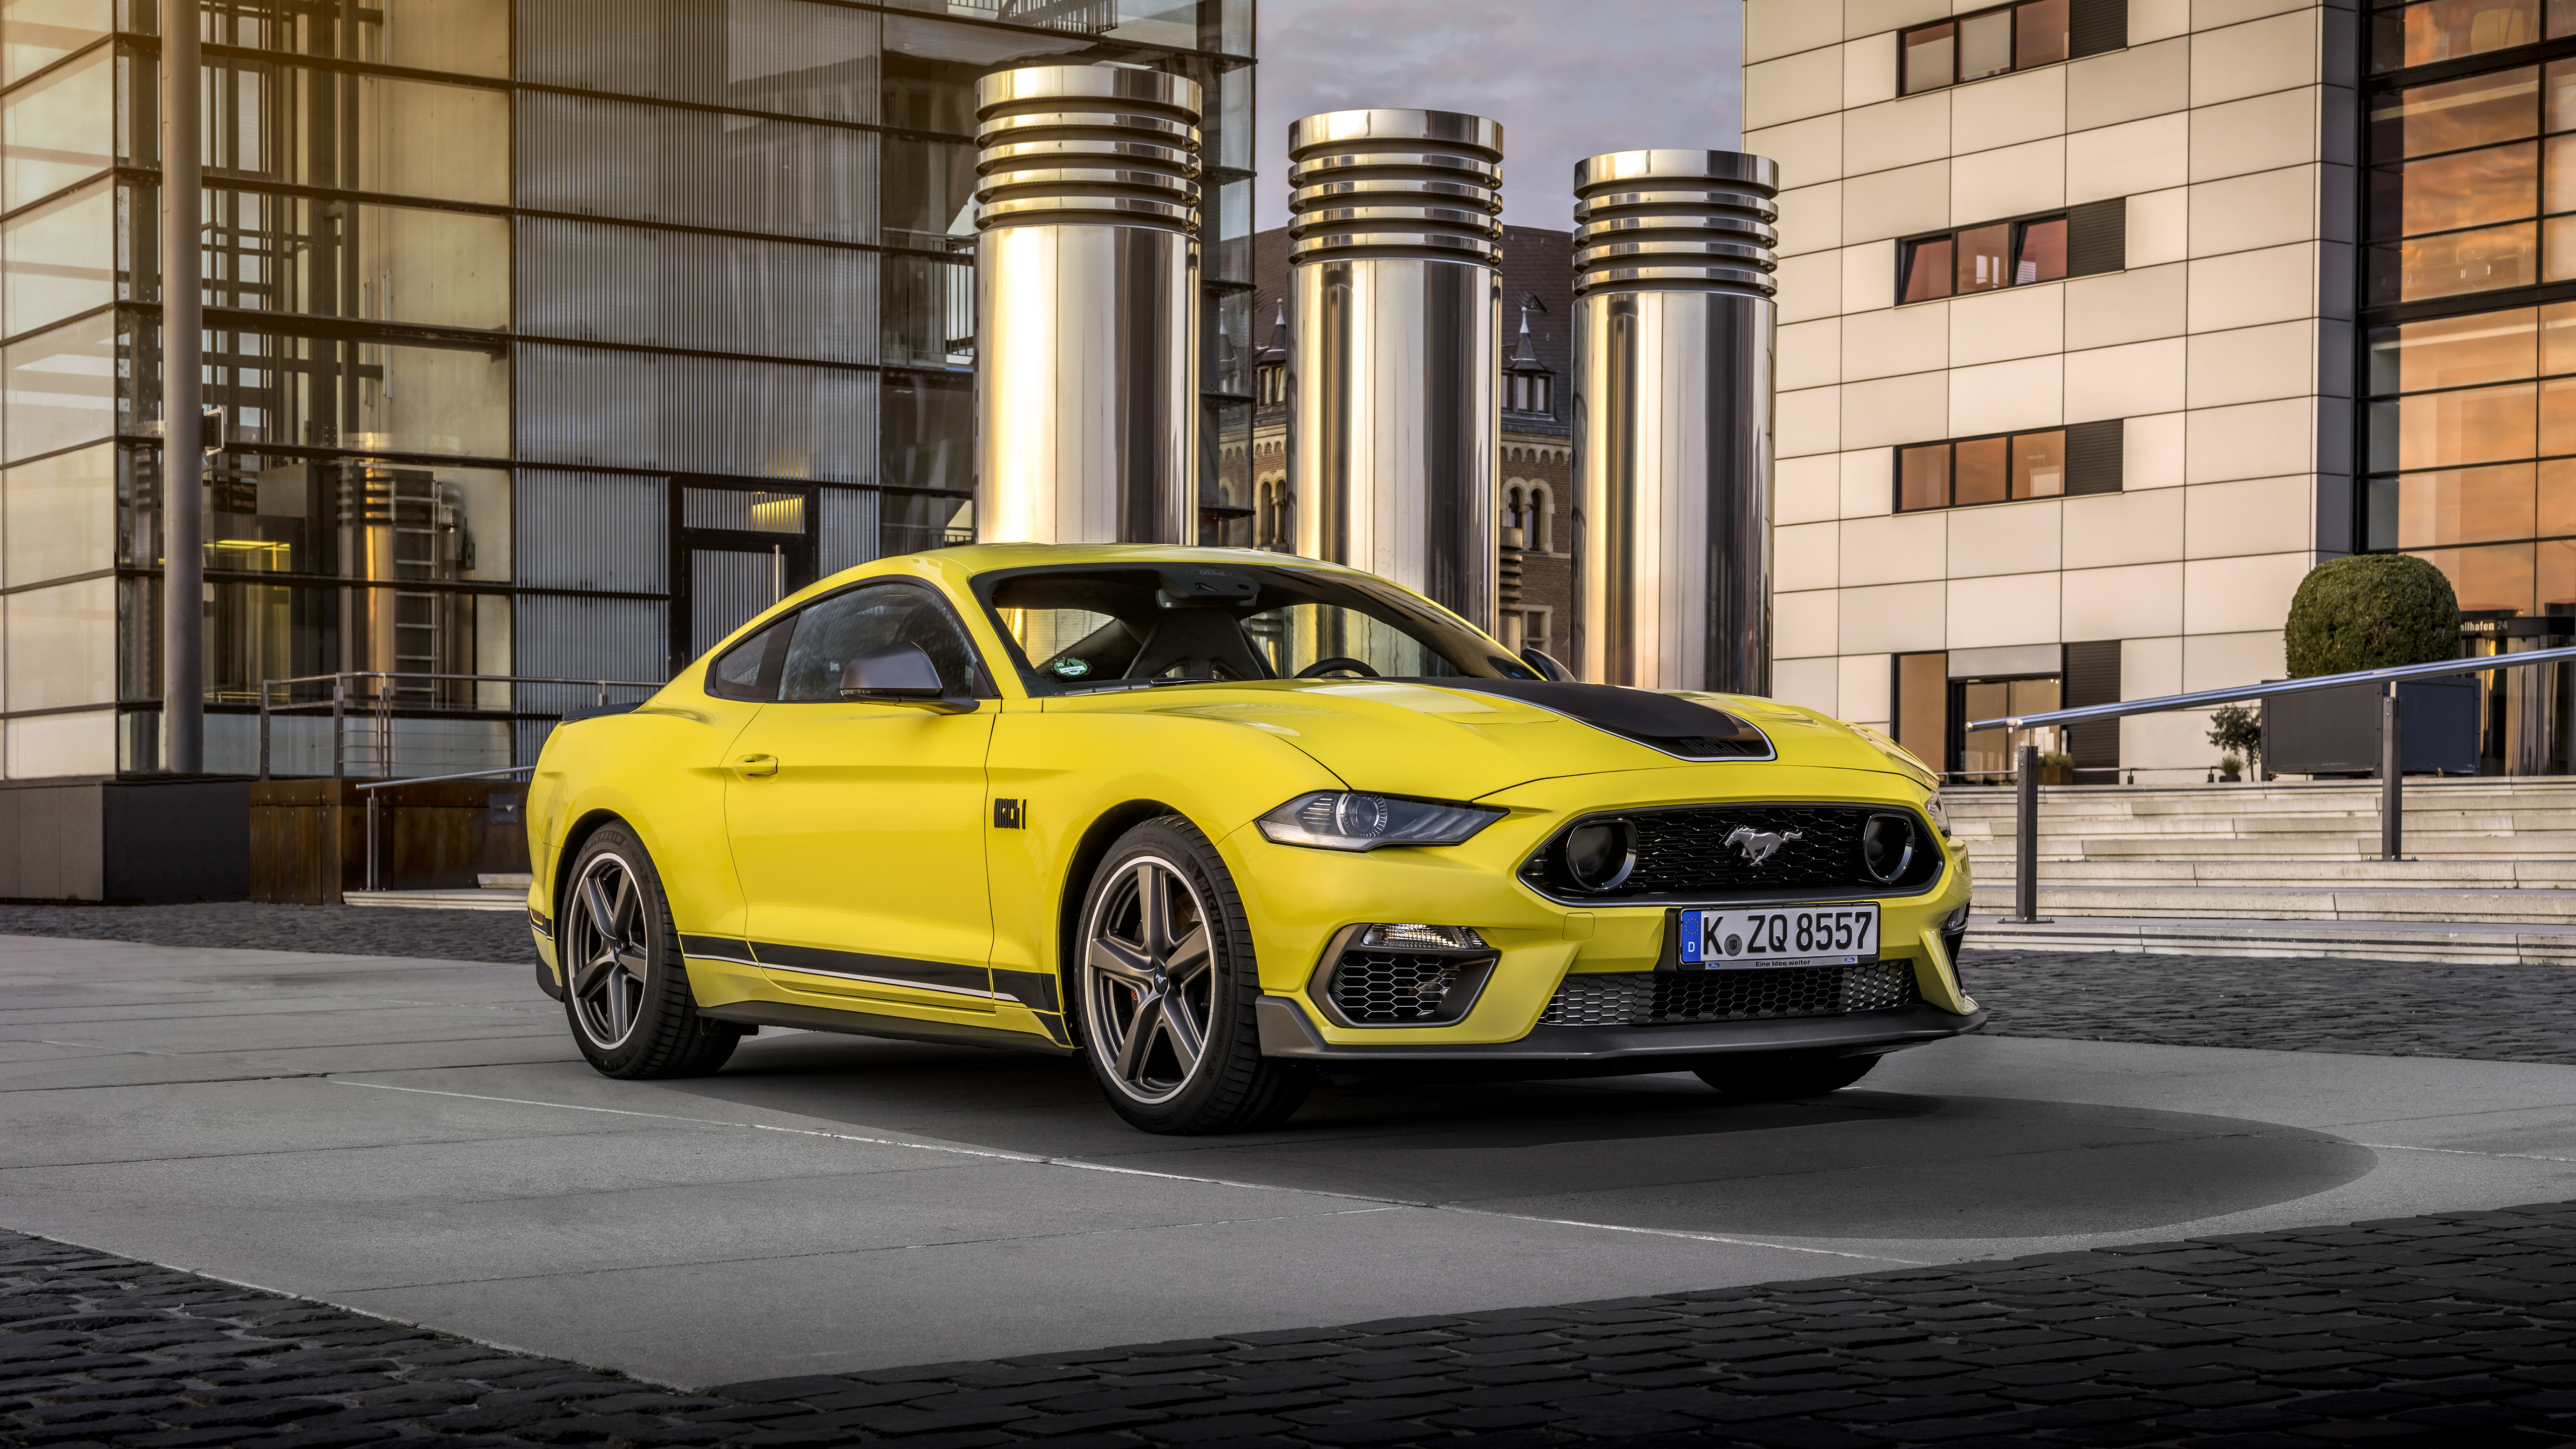 Ford Ford Mustang Mach 1 Car Vehicle Muscle Cars Yellow Cars 5120x2880